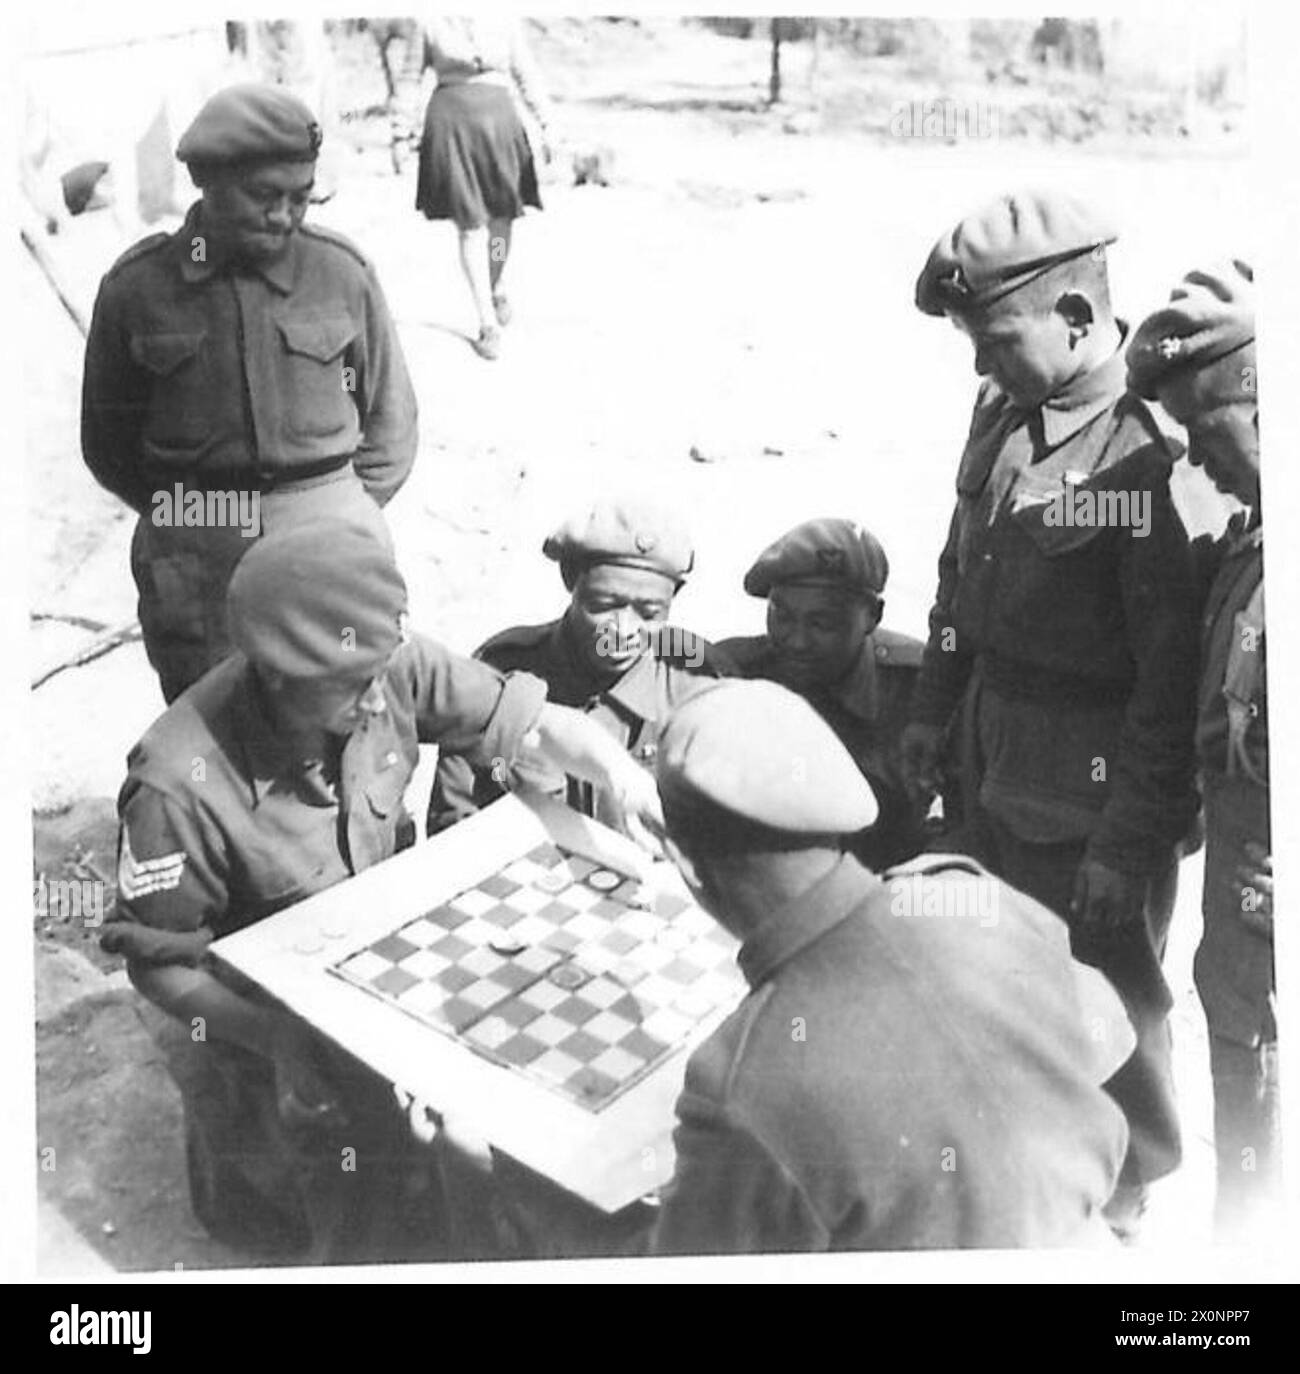 EIGHTH ARMY : THE GURKHAS - A favourite recreation of the Gurkhas is draughts at which they excel. Here, Sgt. Eric Parker of 38 Shipley Road, Broxtowe, Nottingham, plays against a Gurkha. Sgt.Parker is a married man with a daughter ages 2j years. He has 6 years service with the Sherwood Foresters. He was in the Norway Expeditionary Force , was cut off and made for the Swedish border. He was interned in Sweden for 2 1/2 months, then returned to England. He has been in Italy since April 1944 and was at Anzio. Photographic negative , British Army Stock Photo